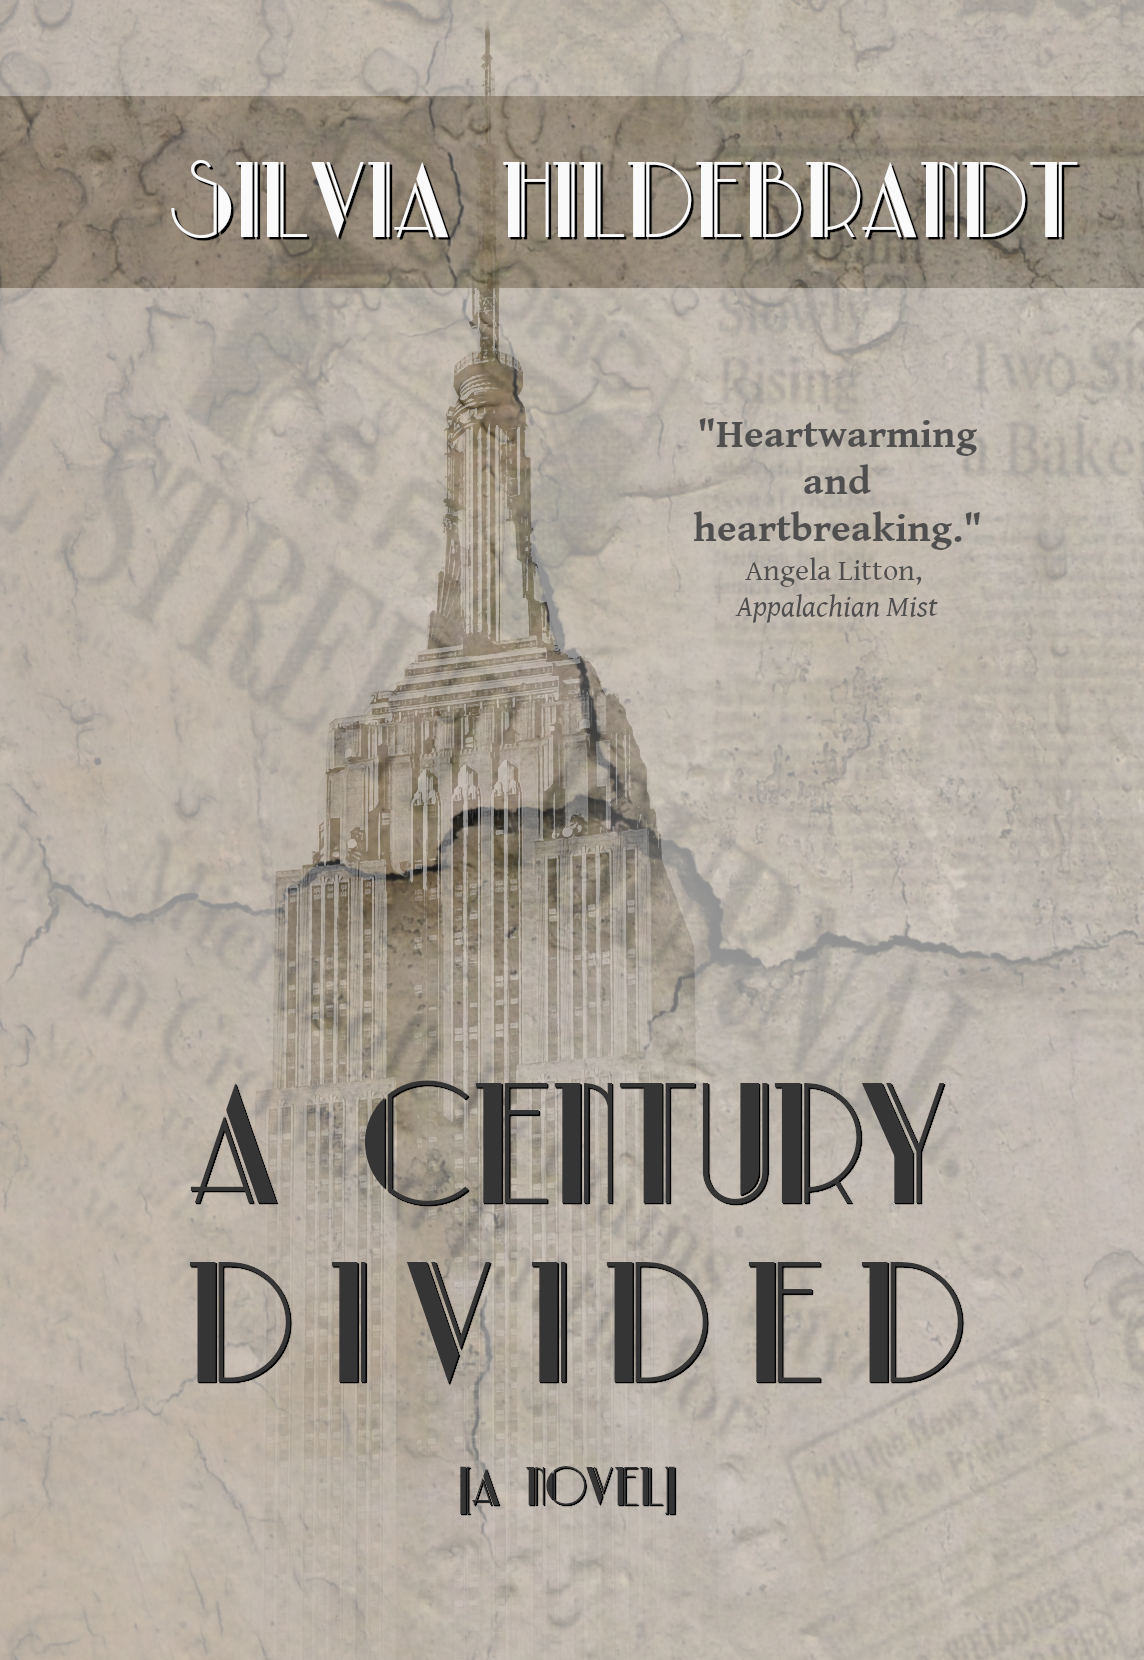 FREE: A Century Divided by Silvia Hildebrandt